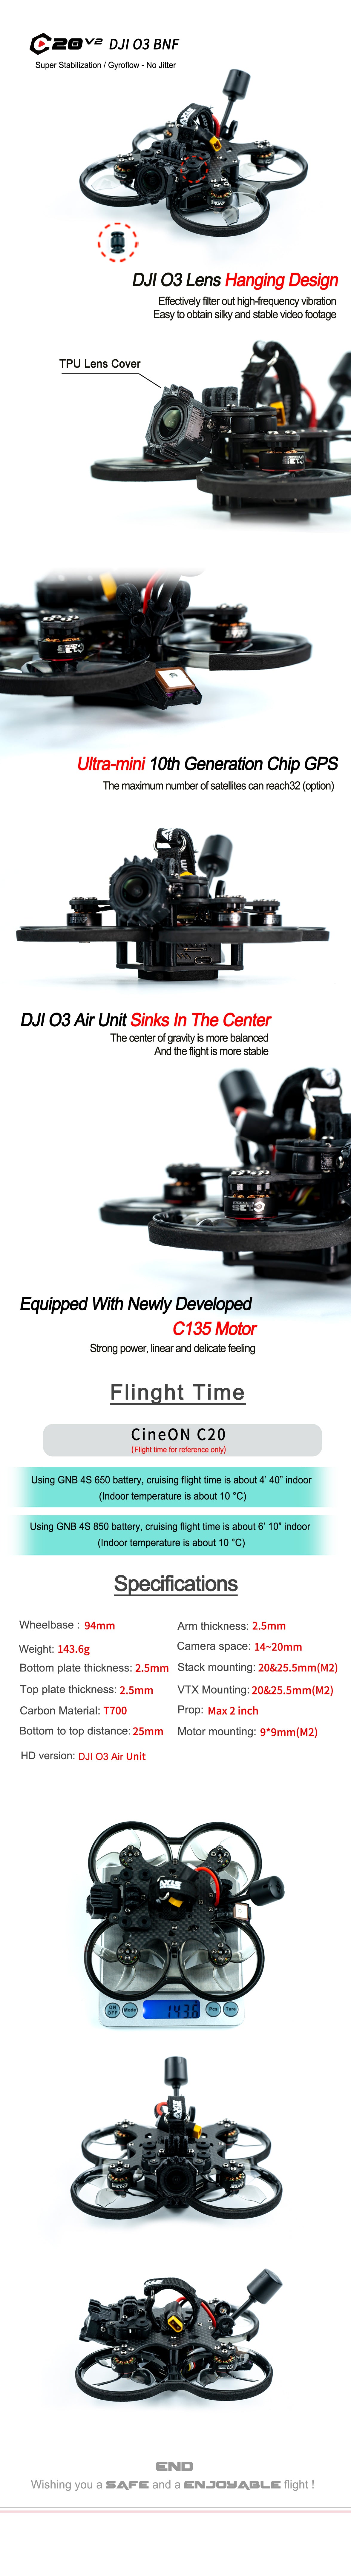 Axisflying CineON C20 V2, DJI 03 Air Unit Sinks In The Center The center of gravity more balanced And the flight